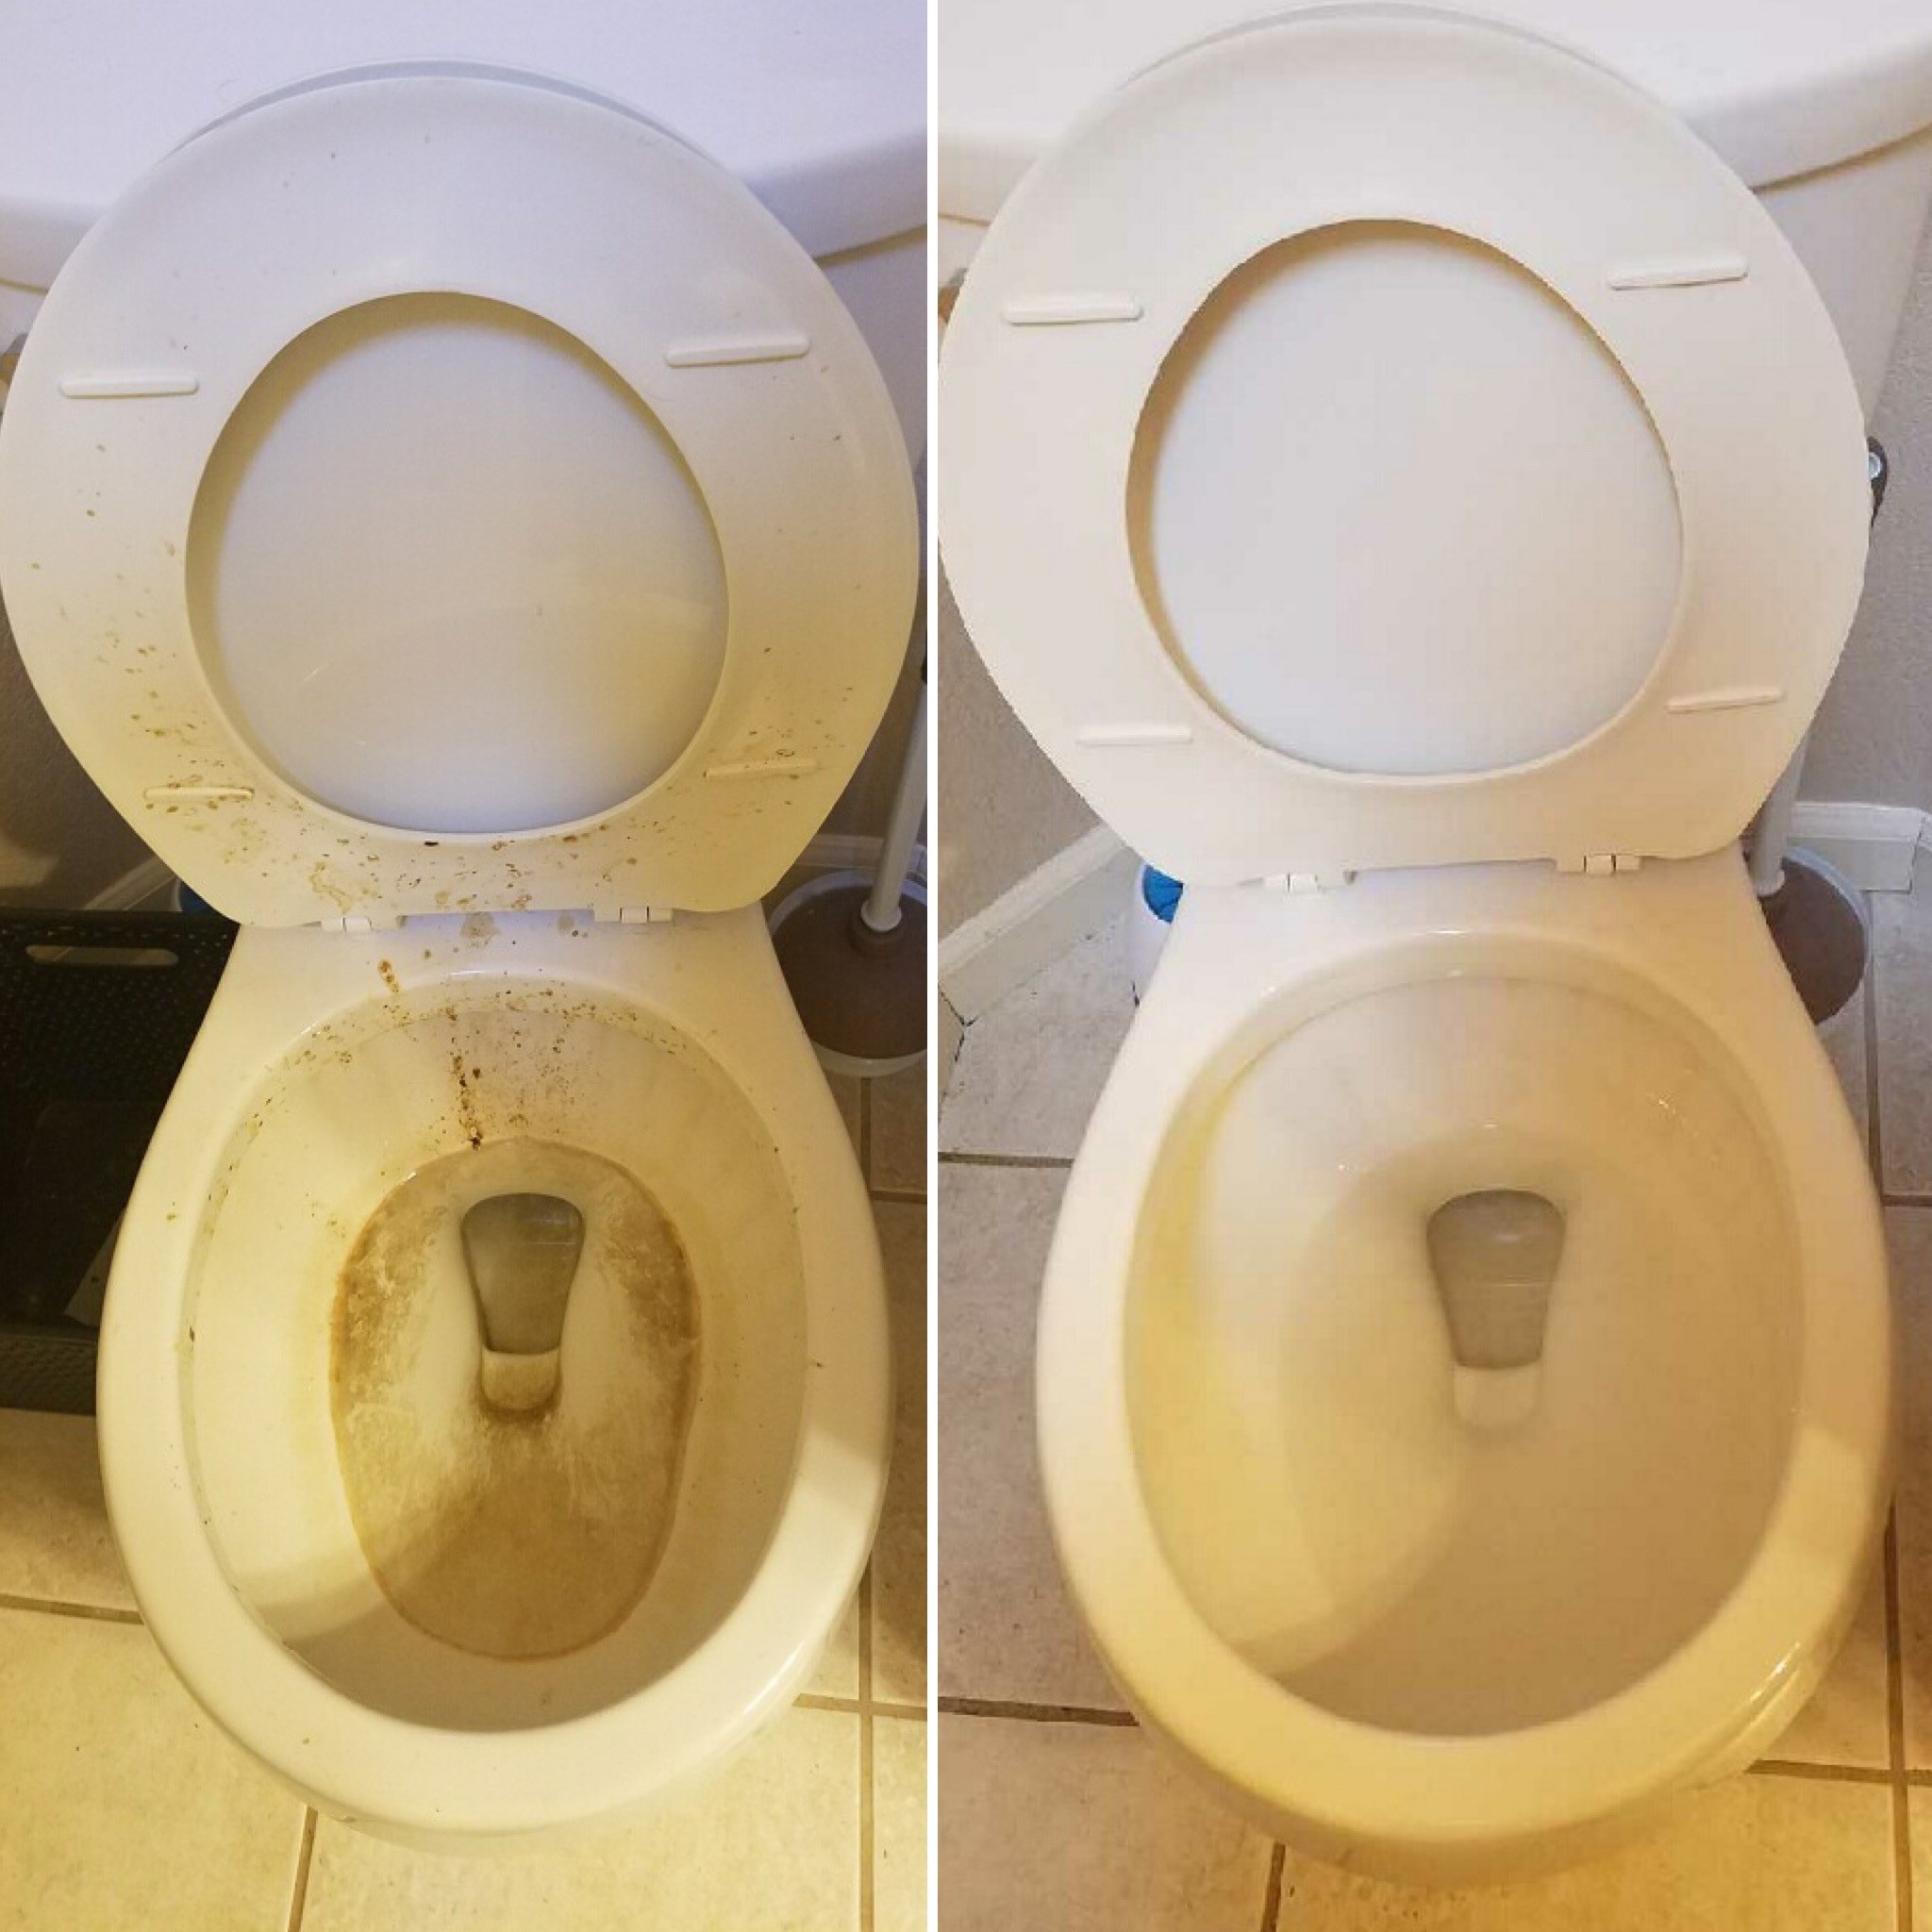 toilet before and after being cleaned